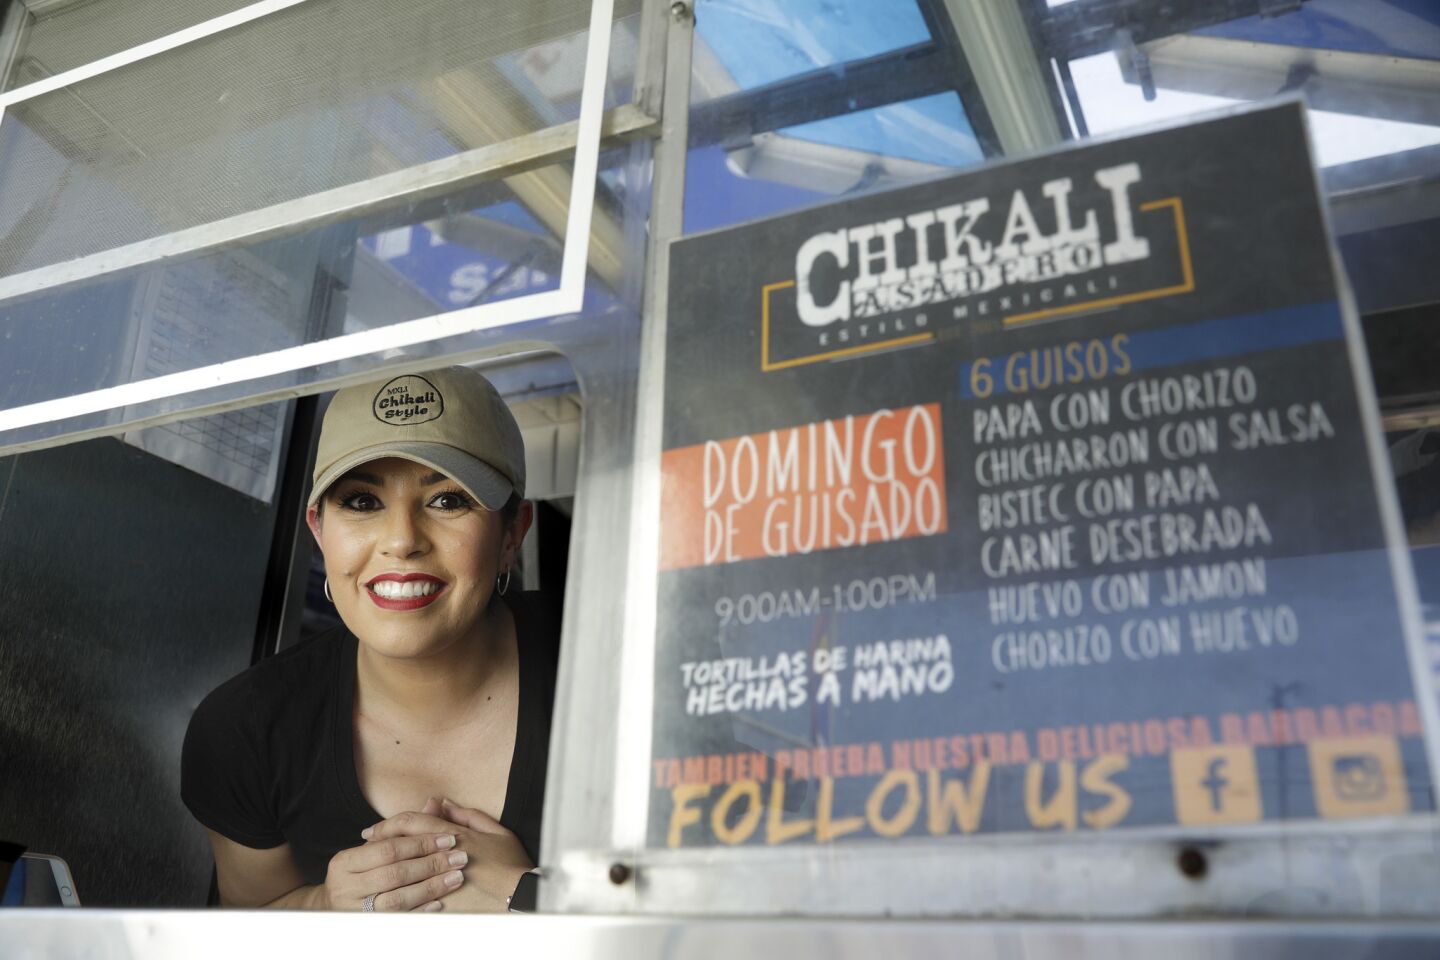 Ana Perez and her family own the taco truck Asadero Chikali. The business started out of her mother's house, and eventually they saved enough money for the truck they bought last October. For the past three months, the truck has set up at an auto dealership lot on South Atlantic Boulevard in East Los Angeles, serving breakfast, lunch and dinner.